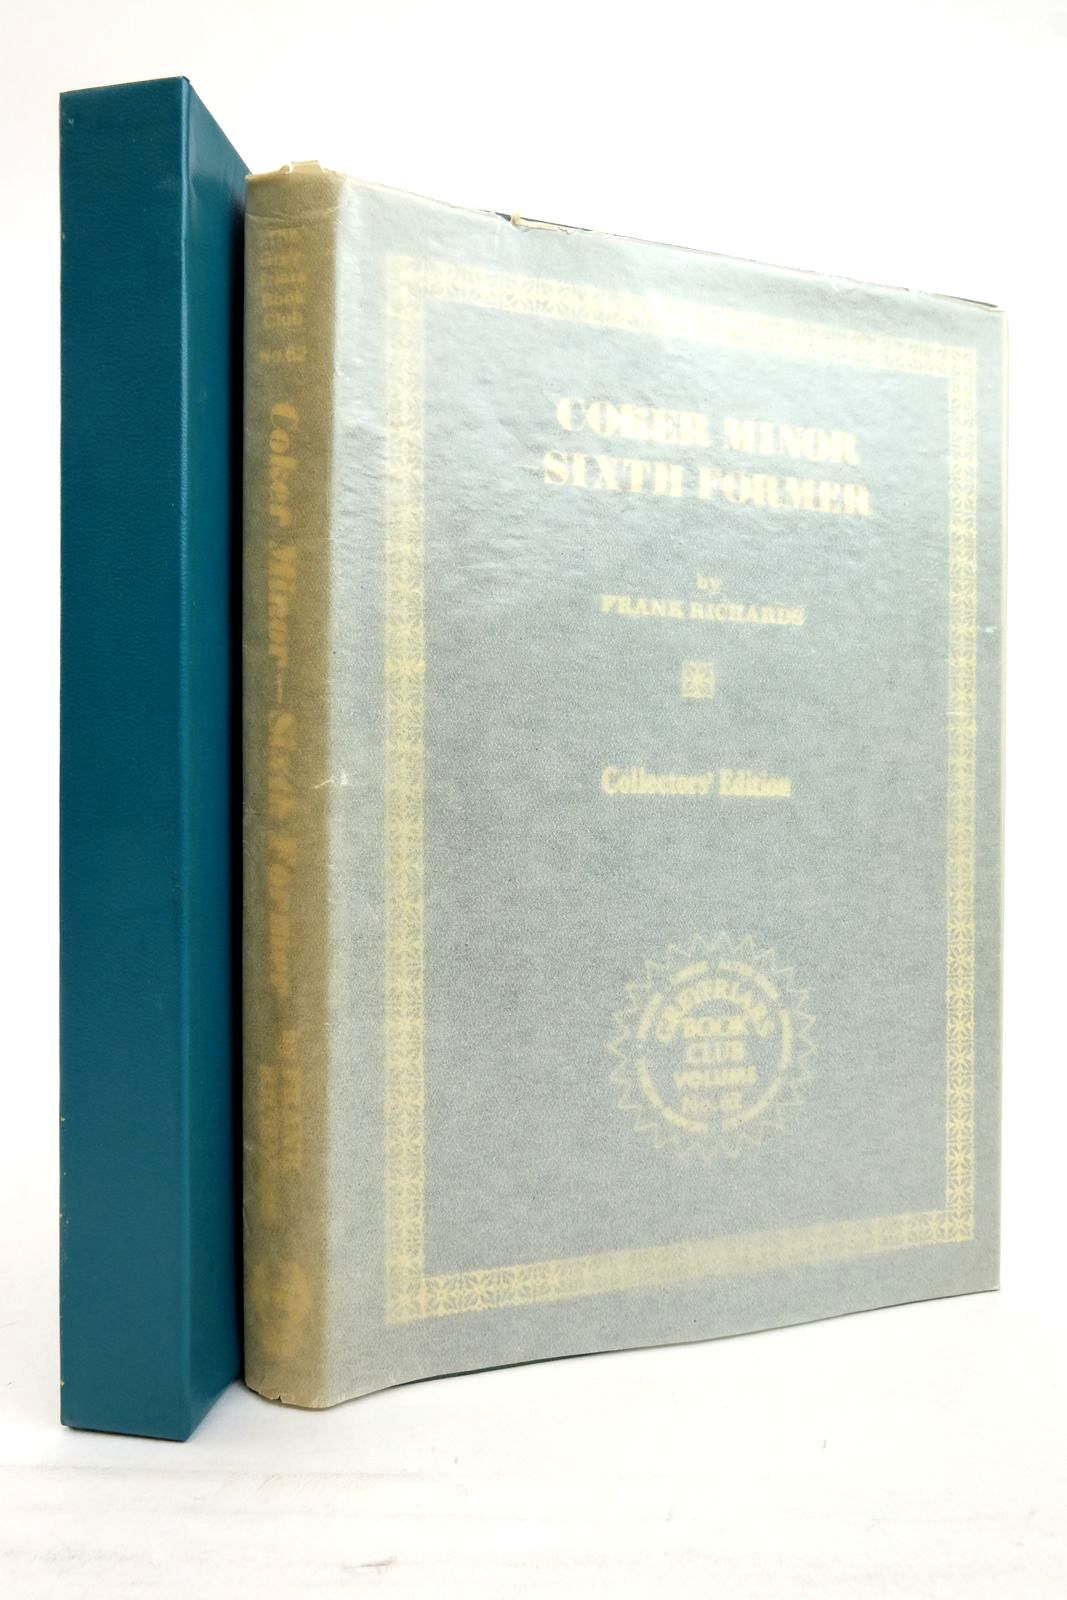 Photo of COKER MINOR - SIXTH FORMER written by Richards, Frank published by Howard Baker (STOCK CODE: 2136641)  for sale by Stella & Rose's Books